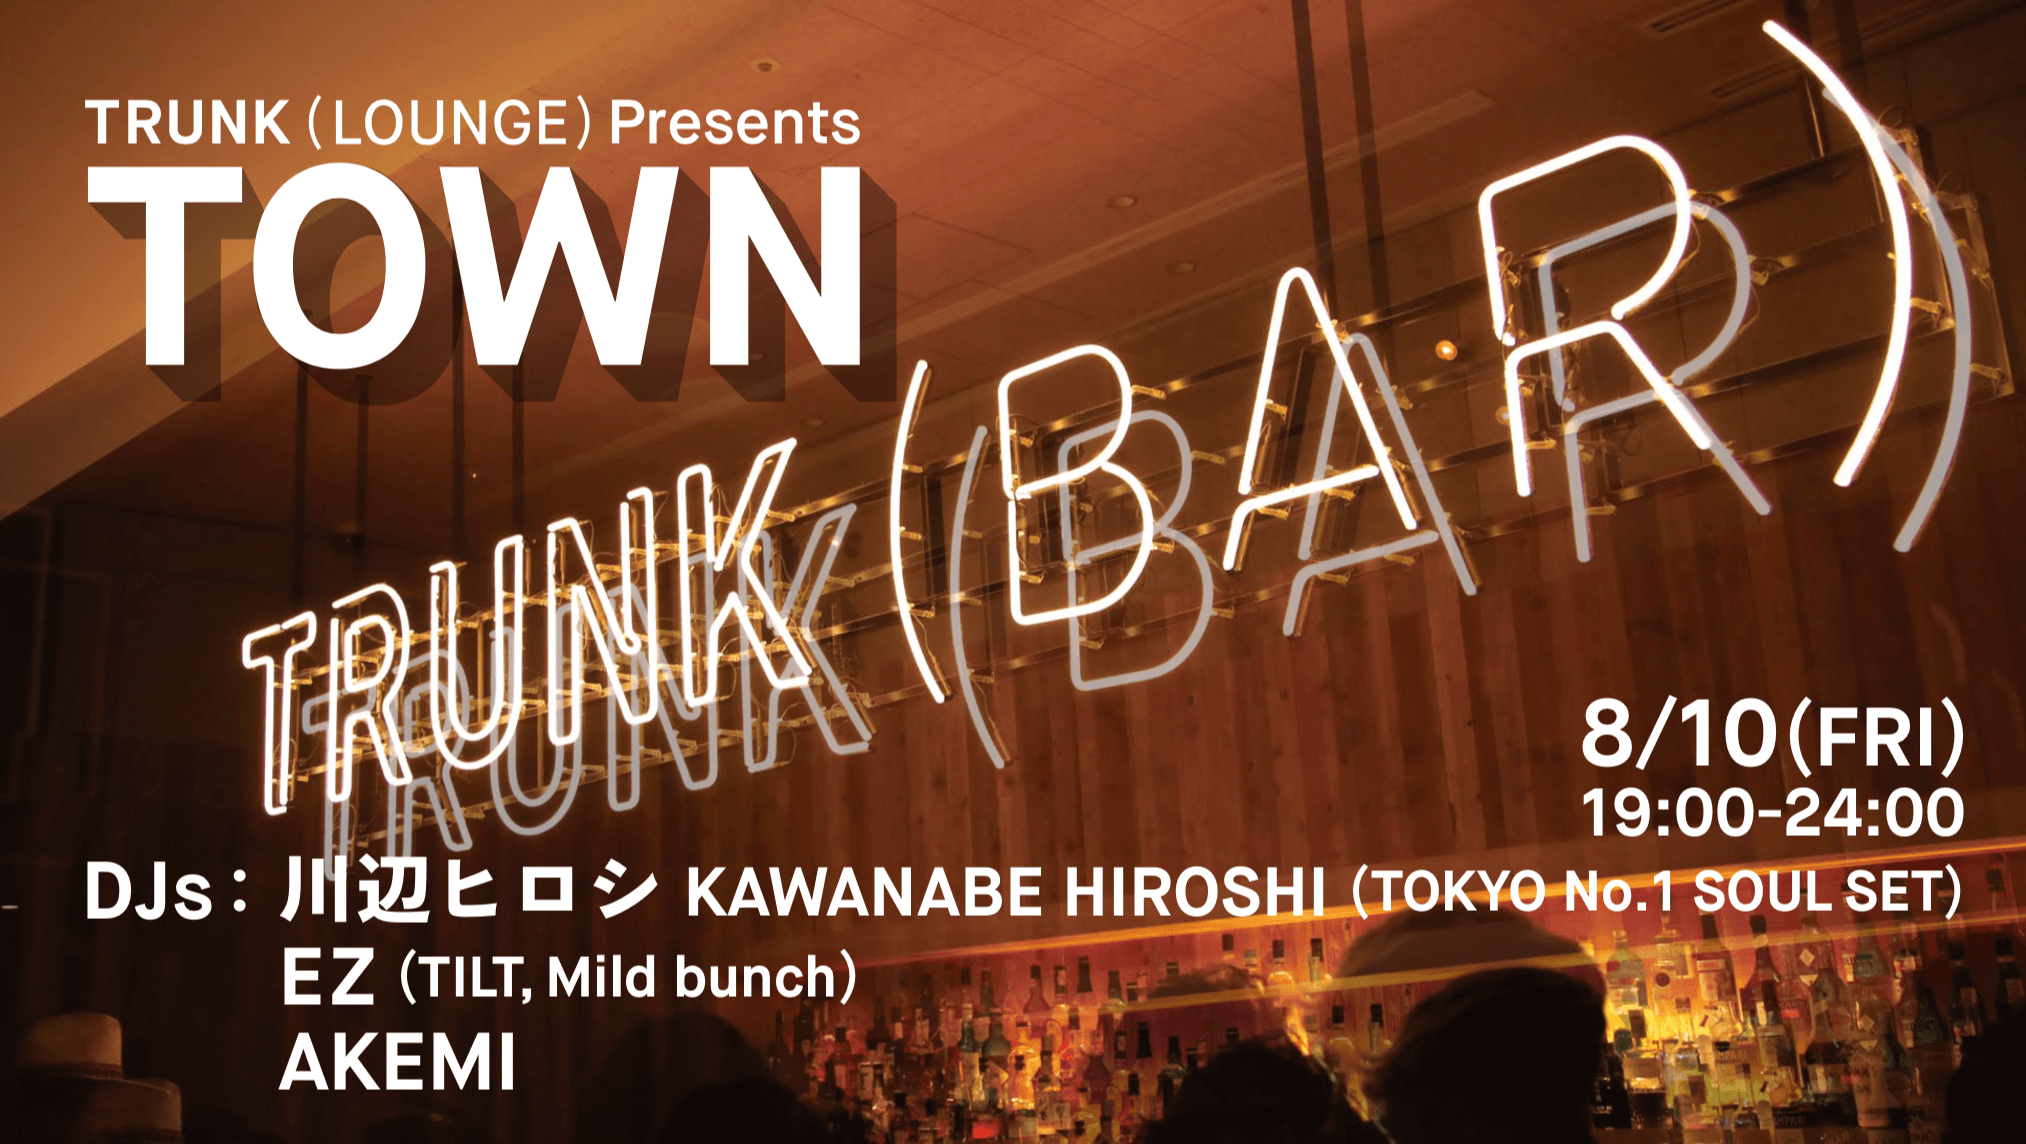 TRUNK(LOUNGE) PRESENTS "Town"